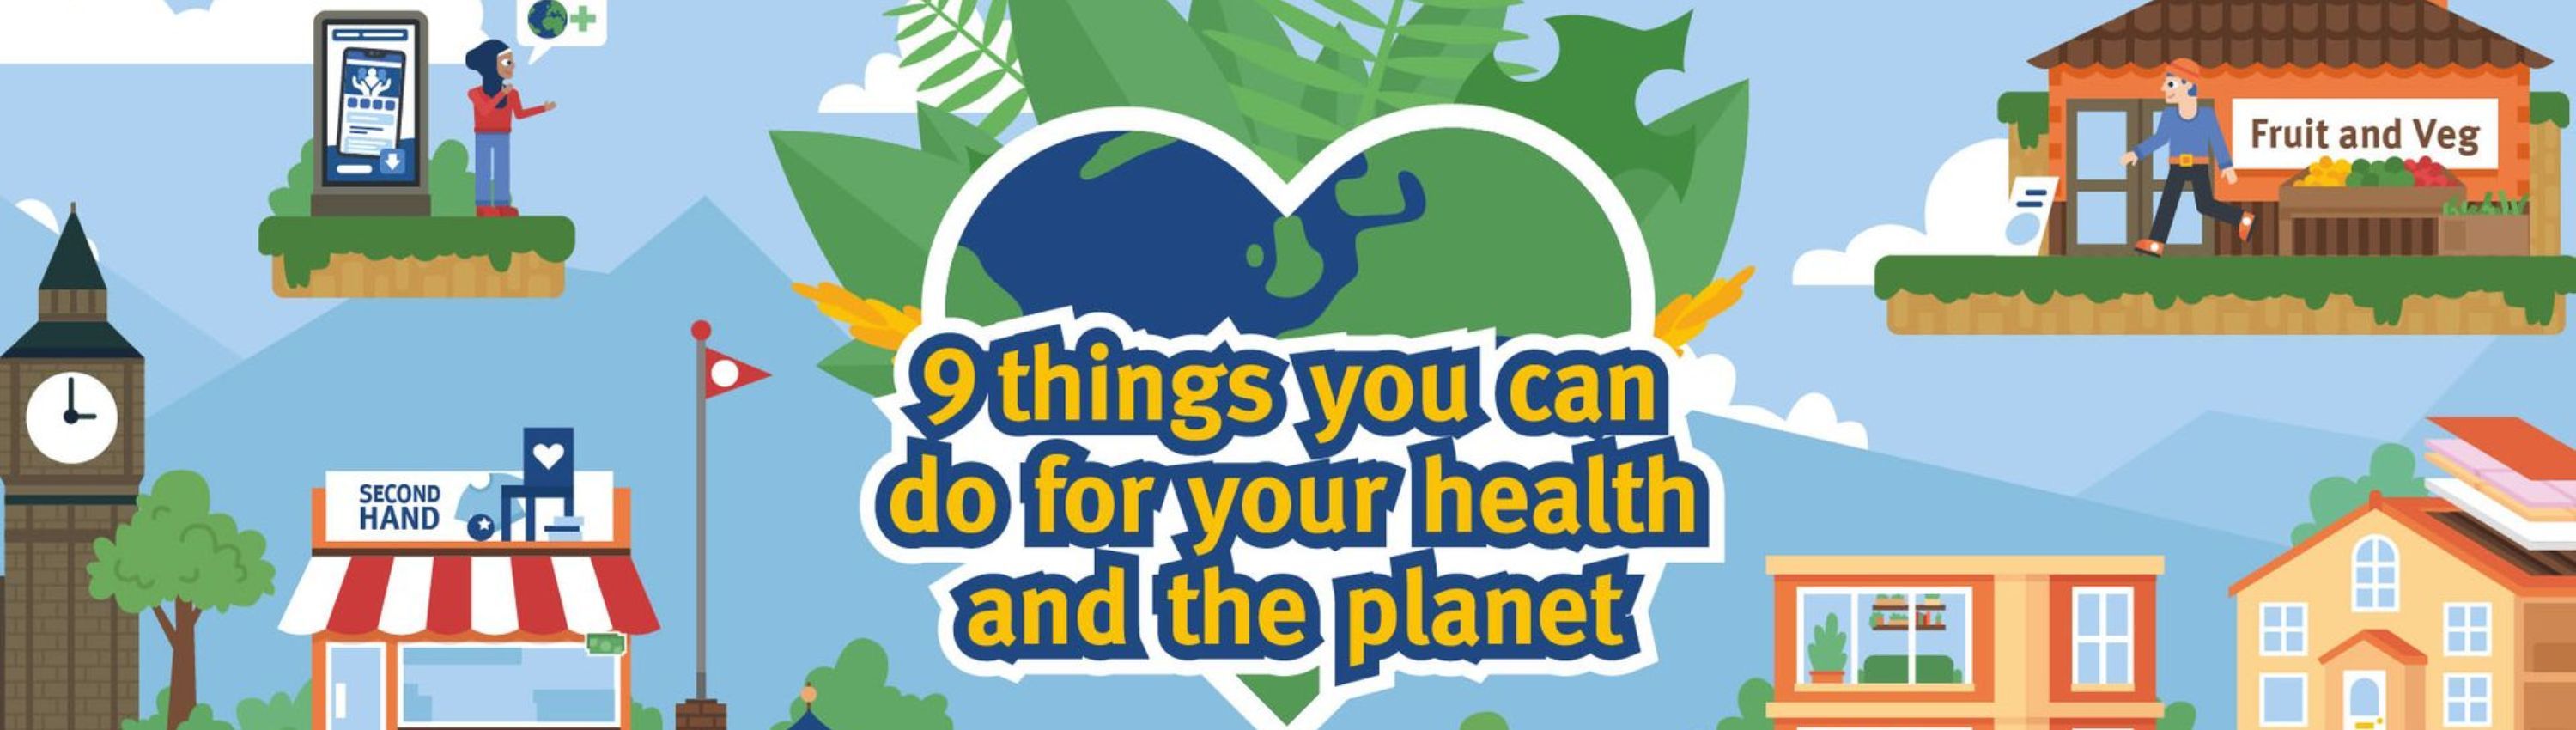 A graphic showing the 9 things you can do for your health and the planet logo - a heart-shaped globe with foliage behind it, set against a scene from the animation